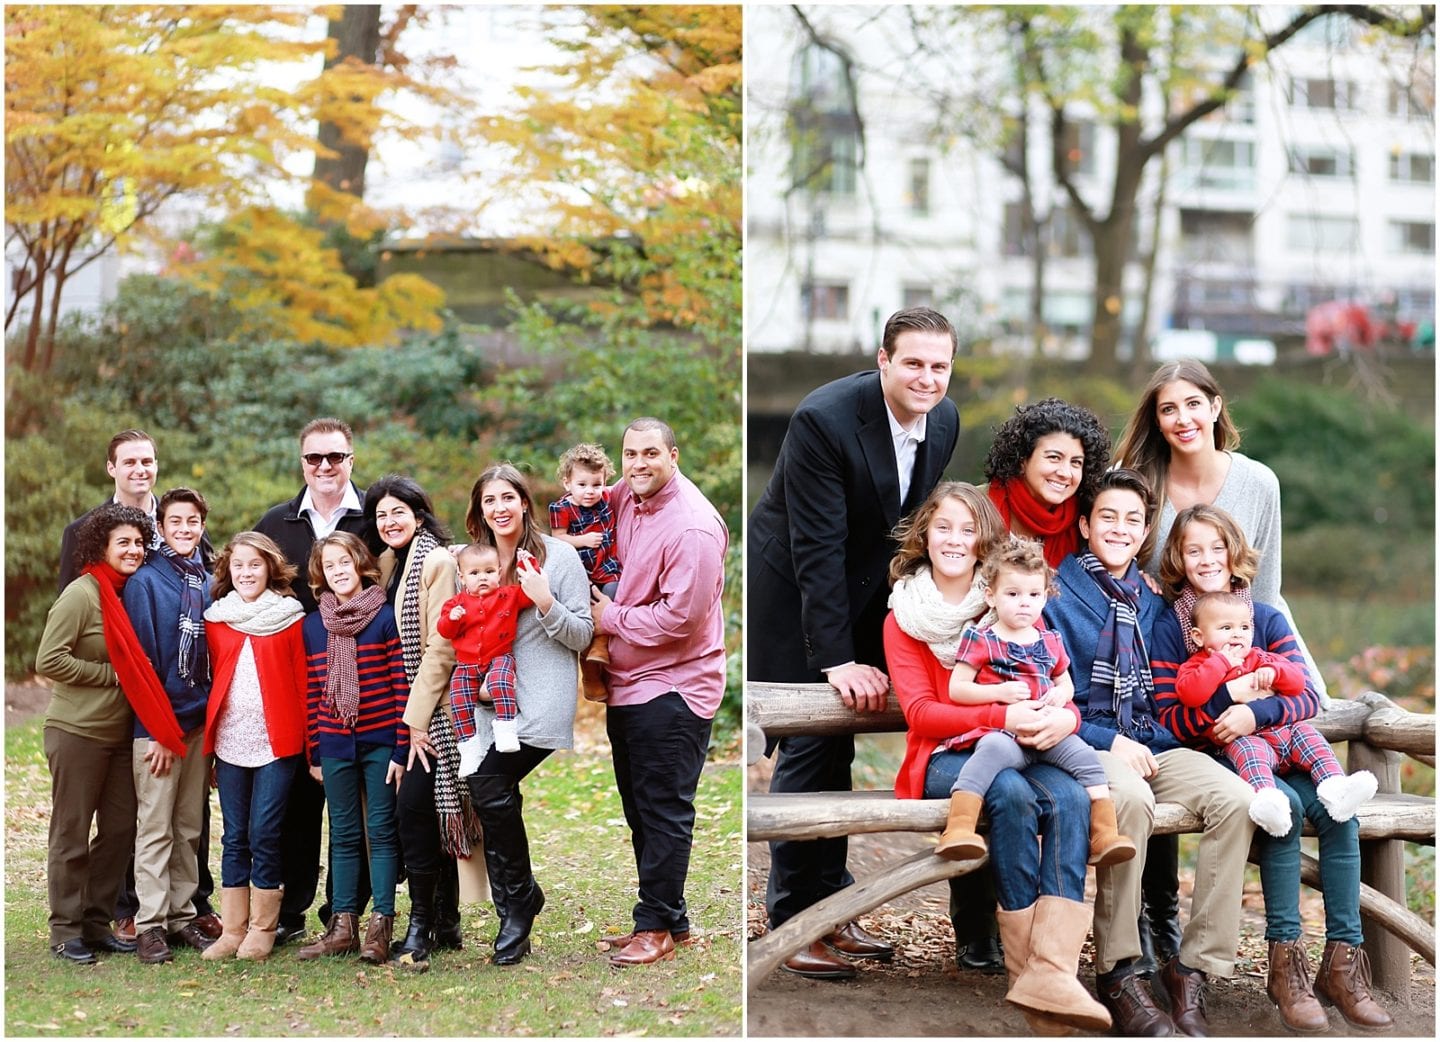 Family Christmas Photo Session in Central Park: NYC Family Photographer Helena Woods shares her tips for a successful Christmas photo session